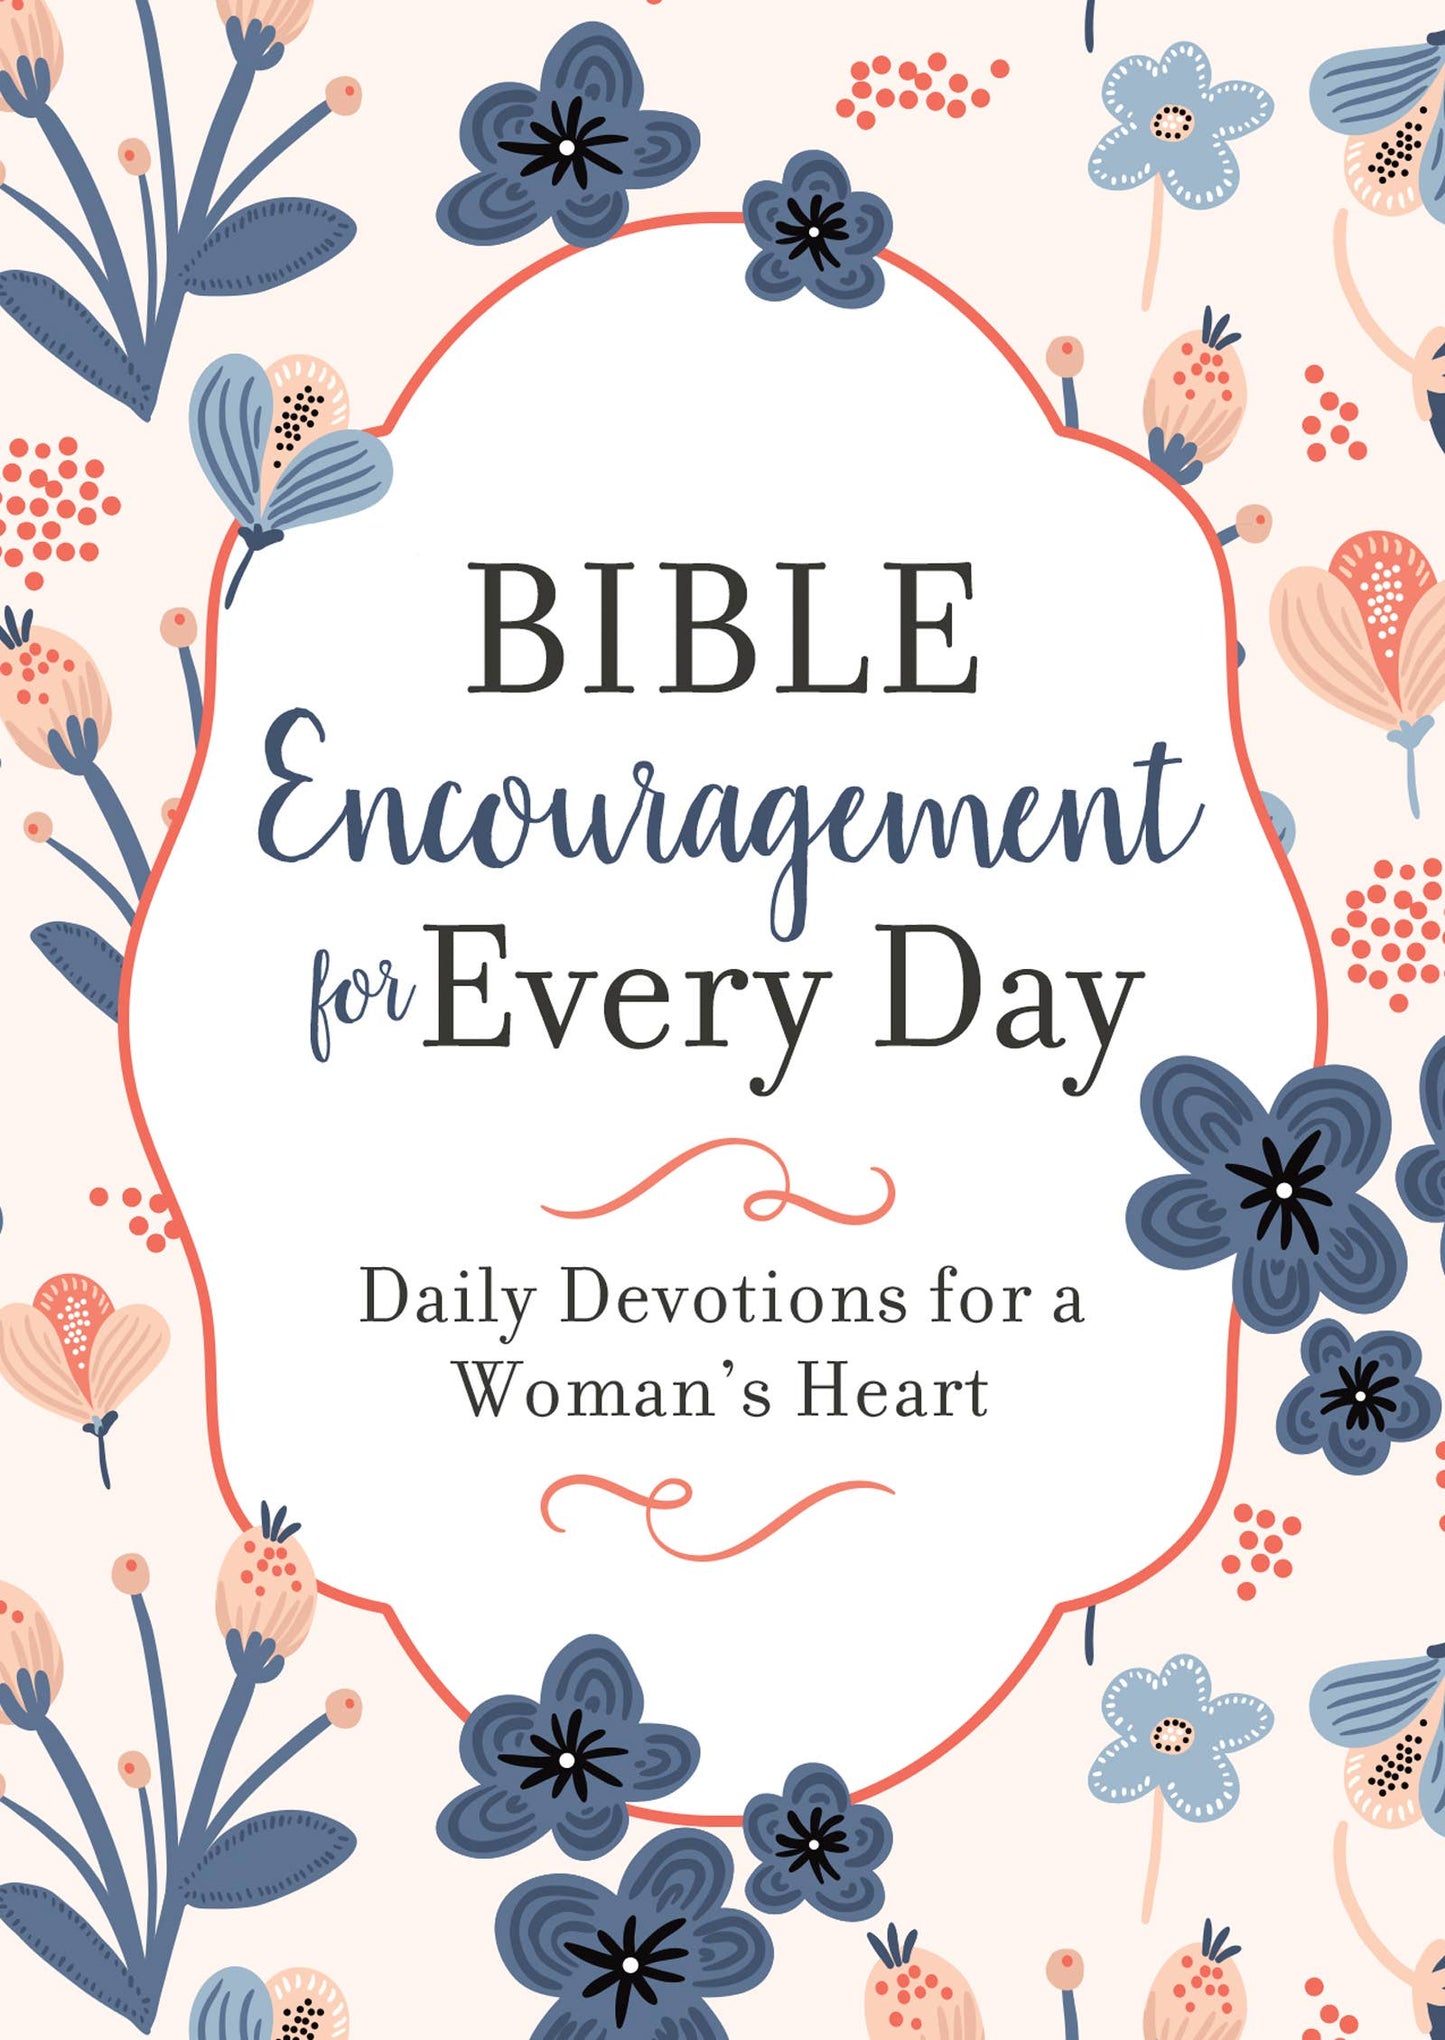 Bible Encouragement for Every Day